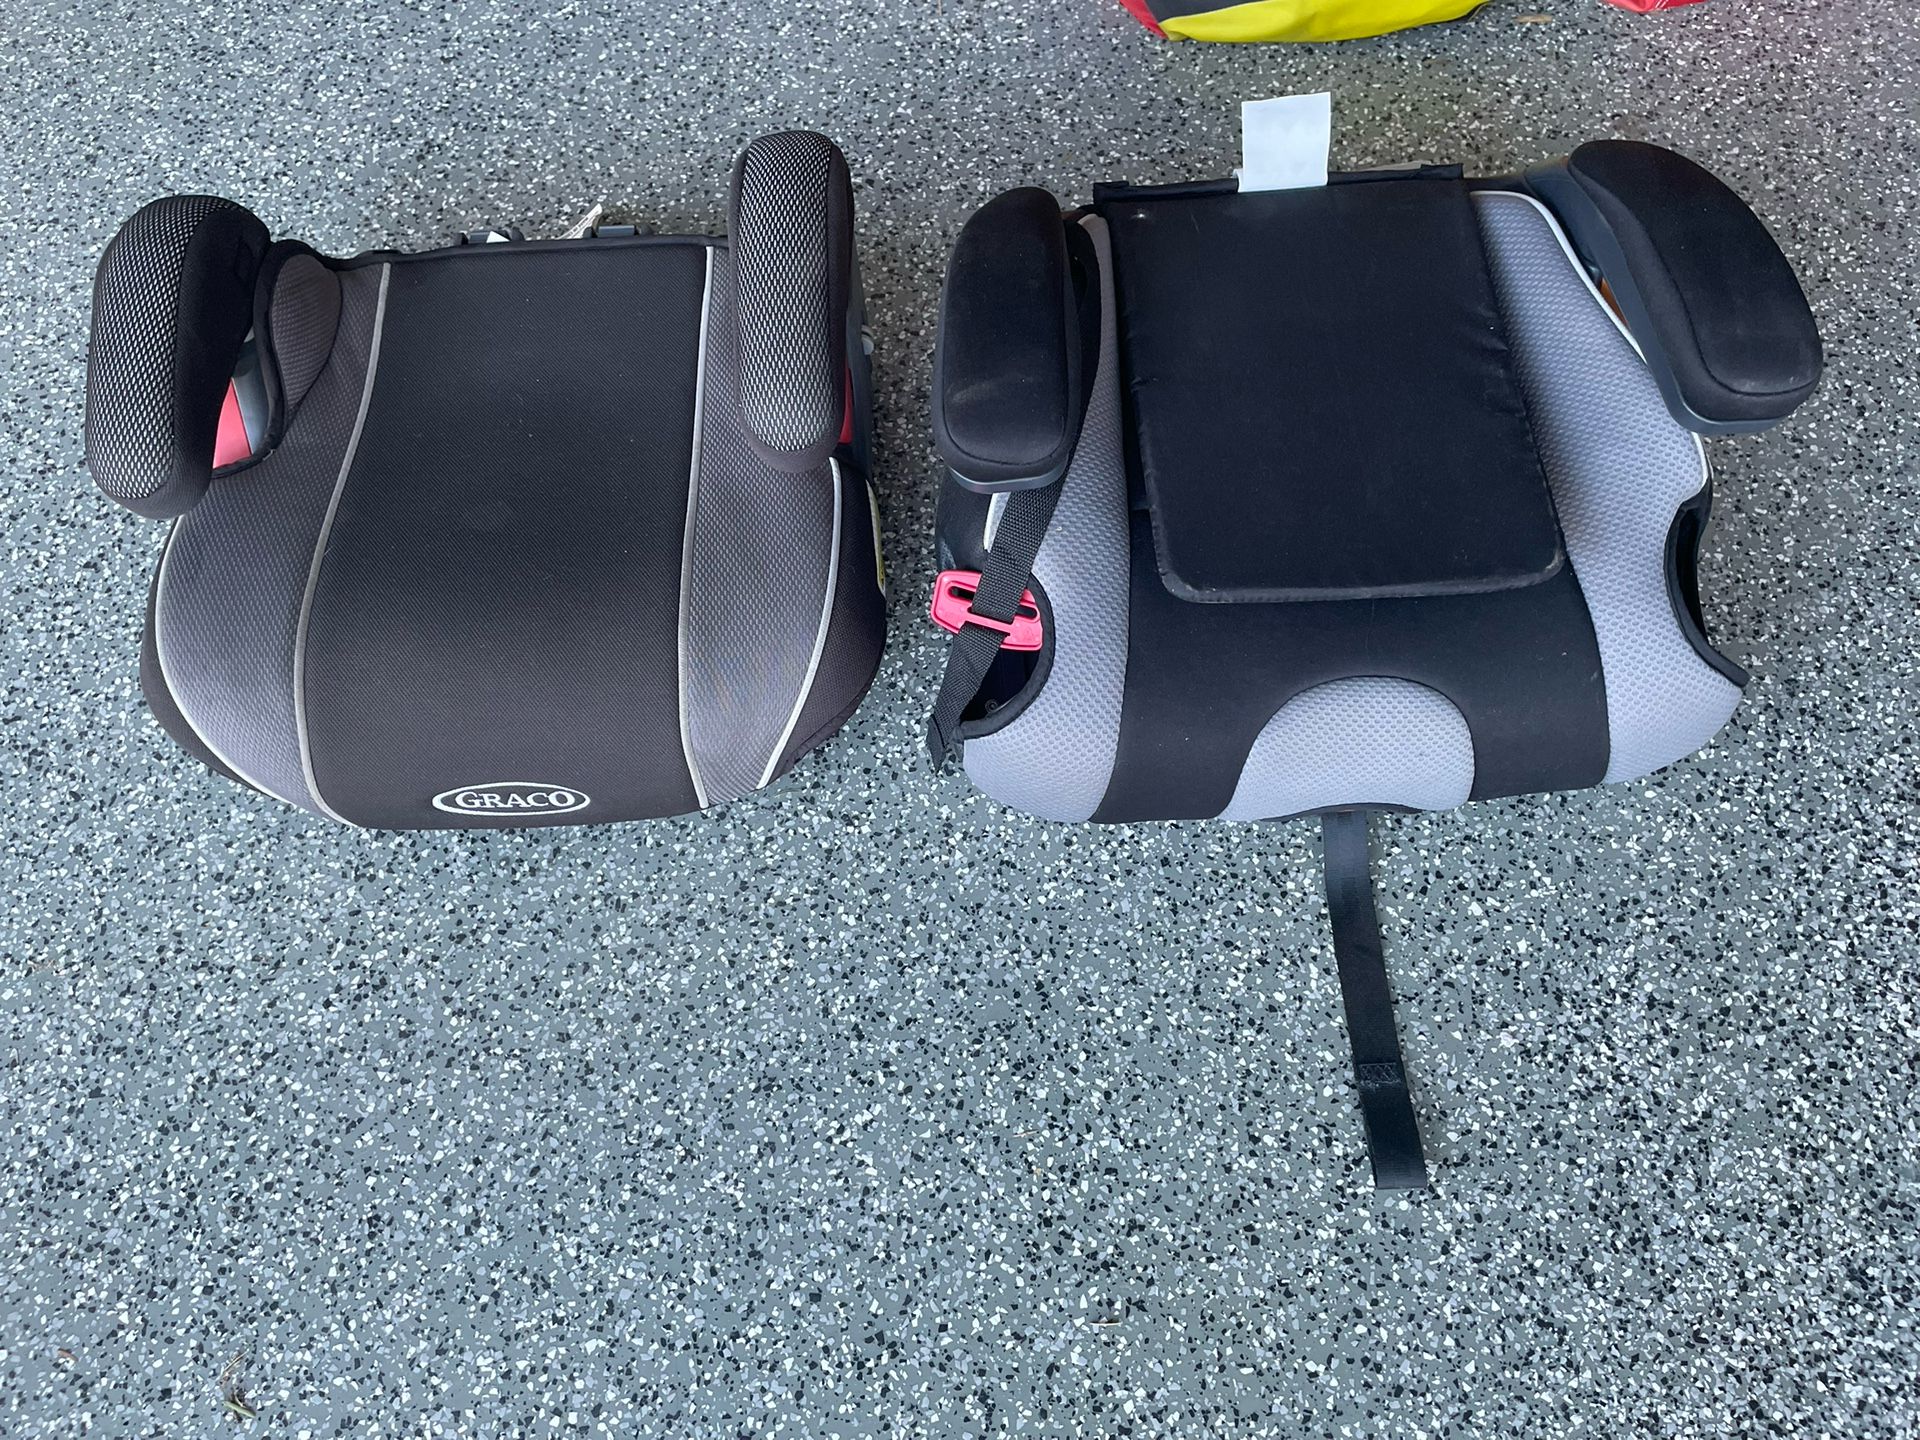 Gently Used Booster Seats From Grandma’s